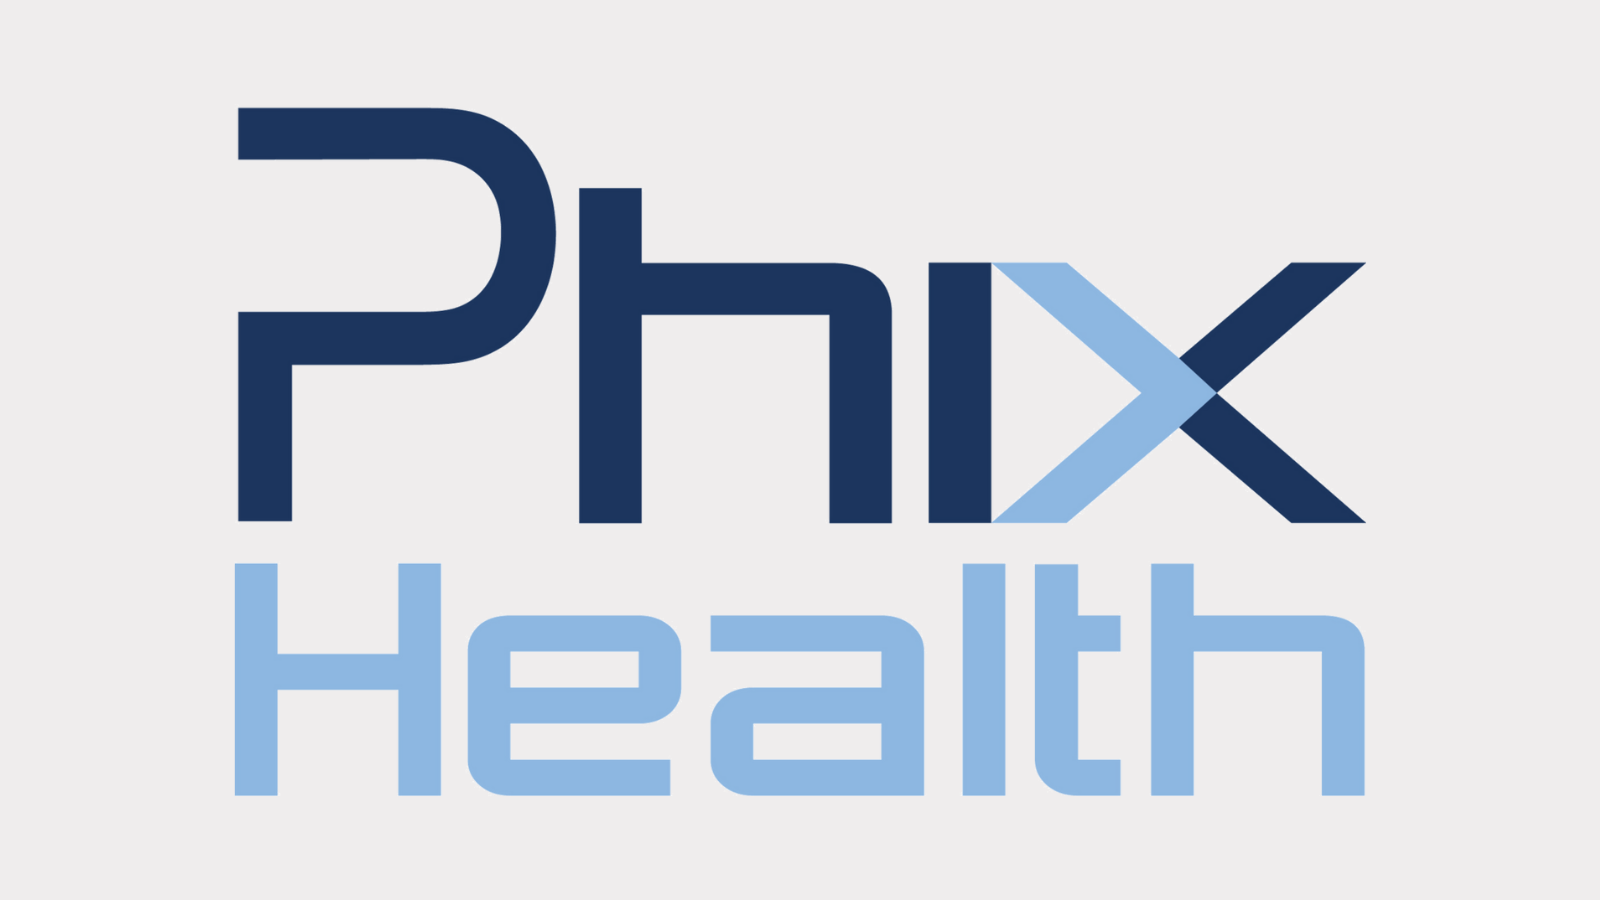 Phix Health Sets Record for Largest and Fastest Seed Round After CodeLaunch Appearance with a $3.5M Seed Round Deal in 5 Months.